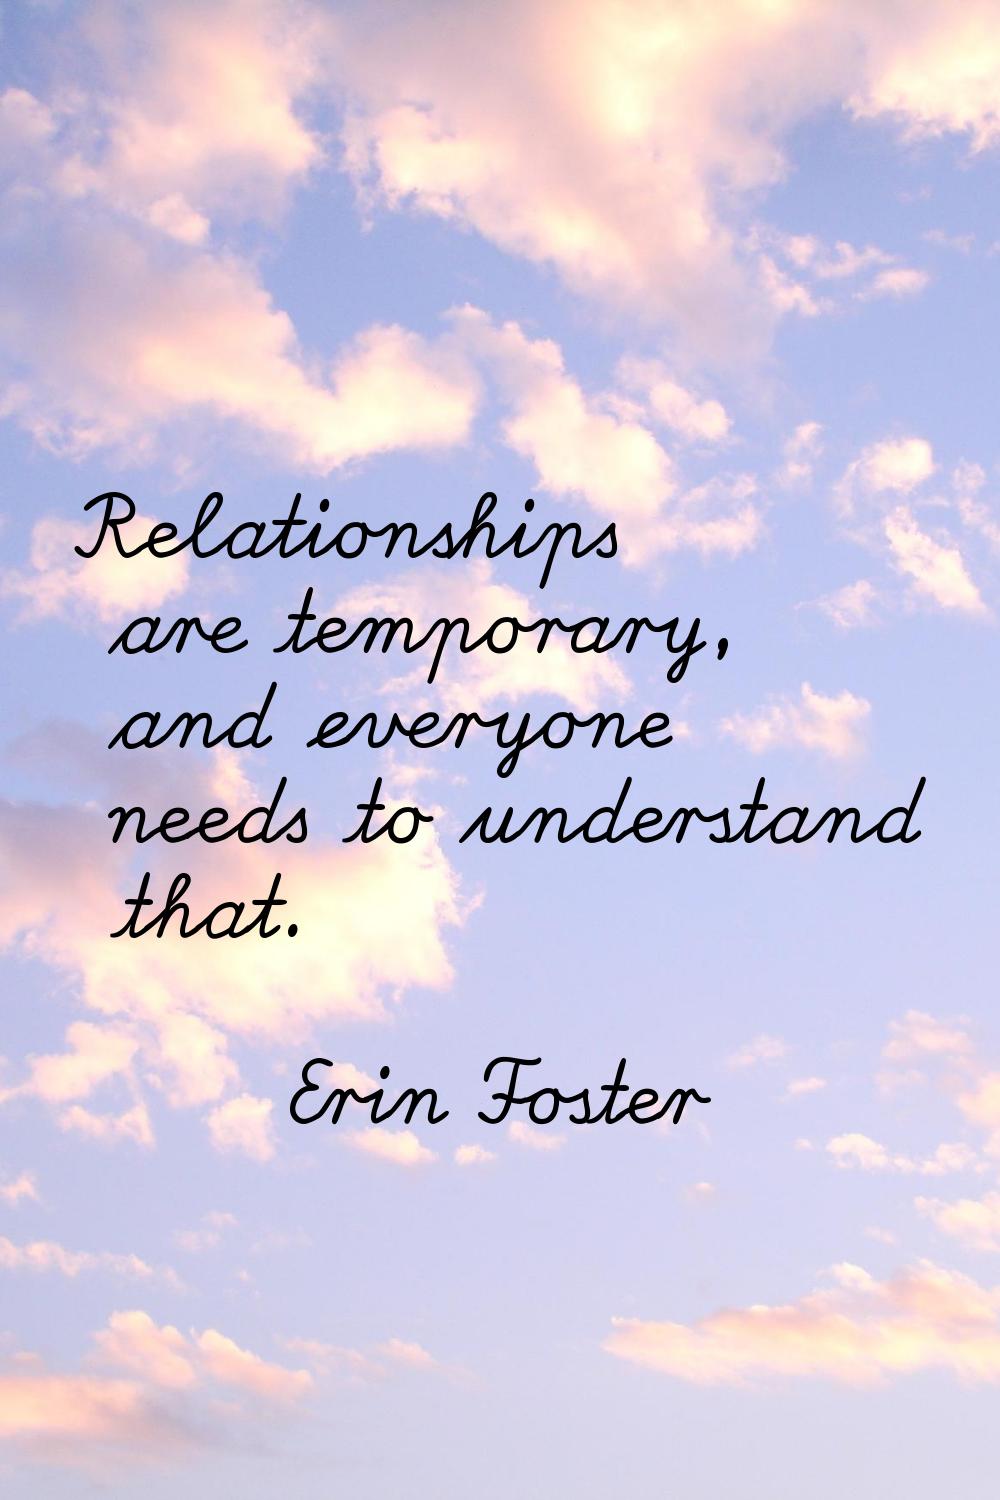 Relationships are temporary, and everyone needs to understand that.